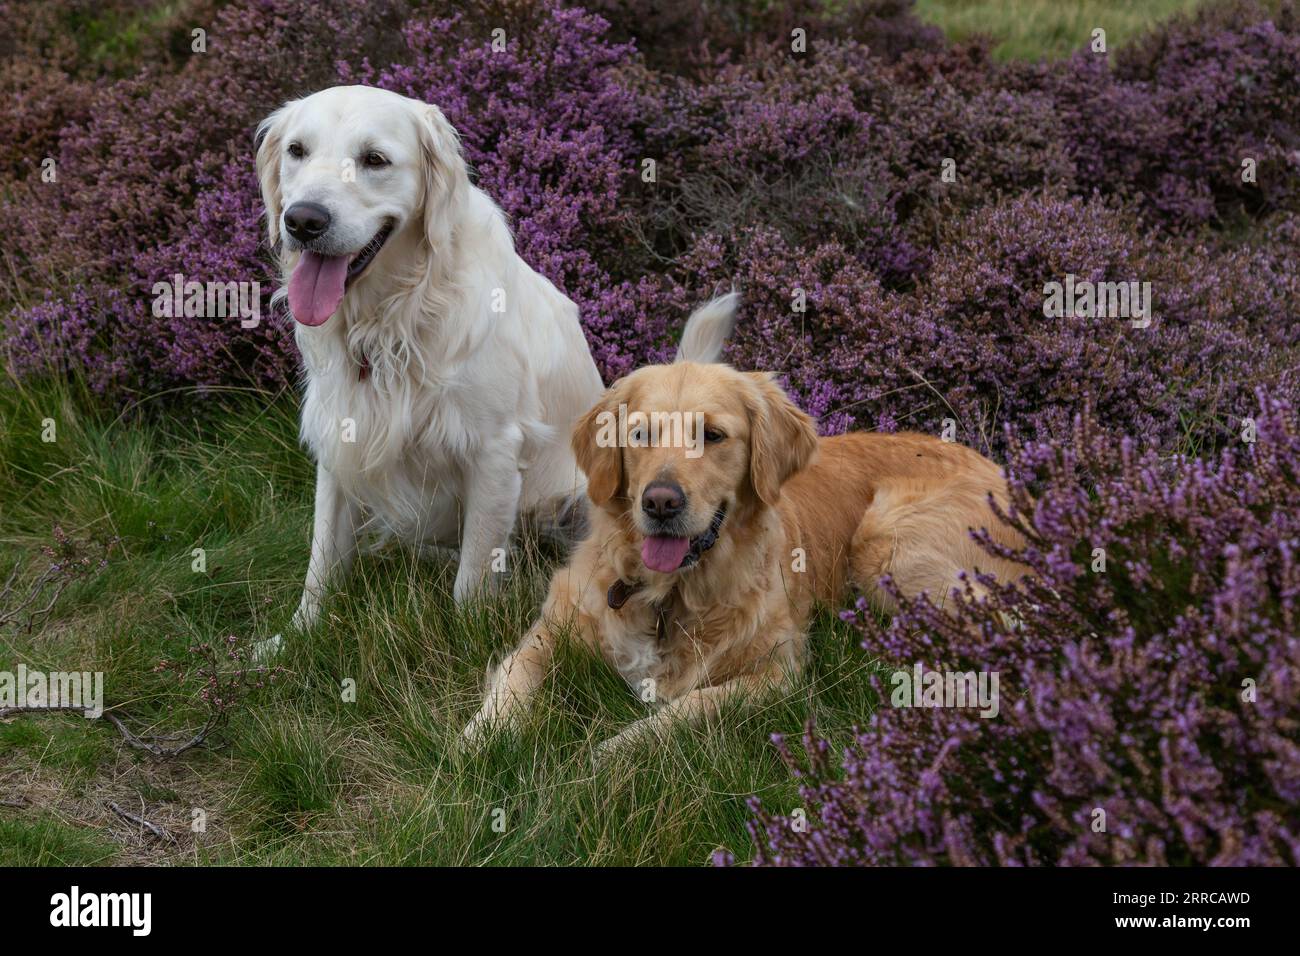 A pair of golden retrievers (one pale and one dark) in purple heather. One dog is sitting, the other is lying down. Stock Photo